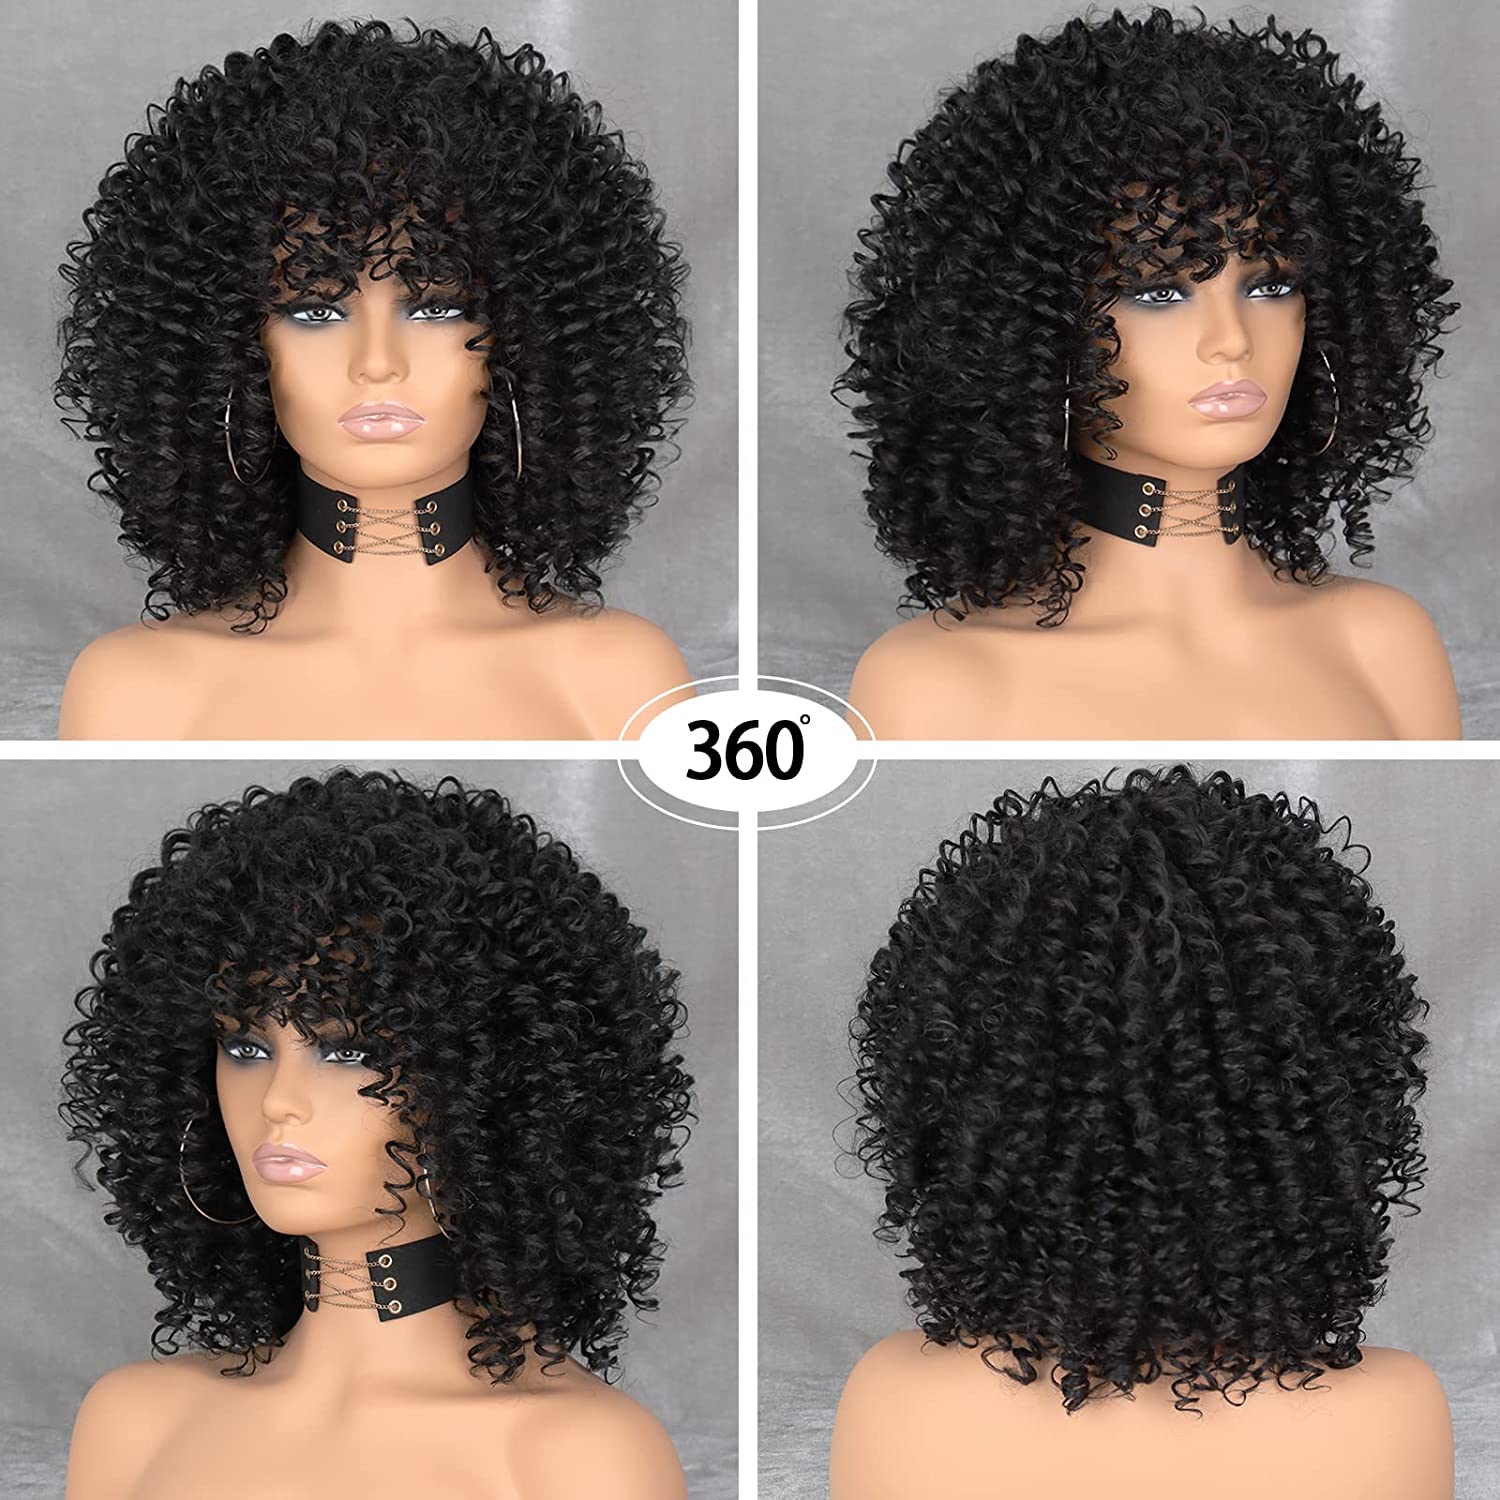 Black Curly Afro Wig for Women, Kinky Black Curly Wigs for Women, Natural Synthetic Curly Wig with Bangs